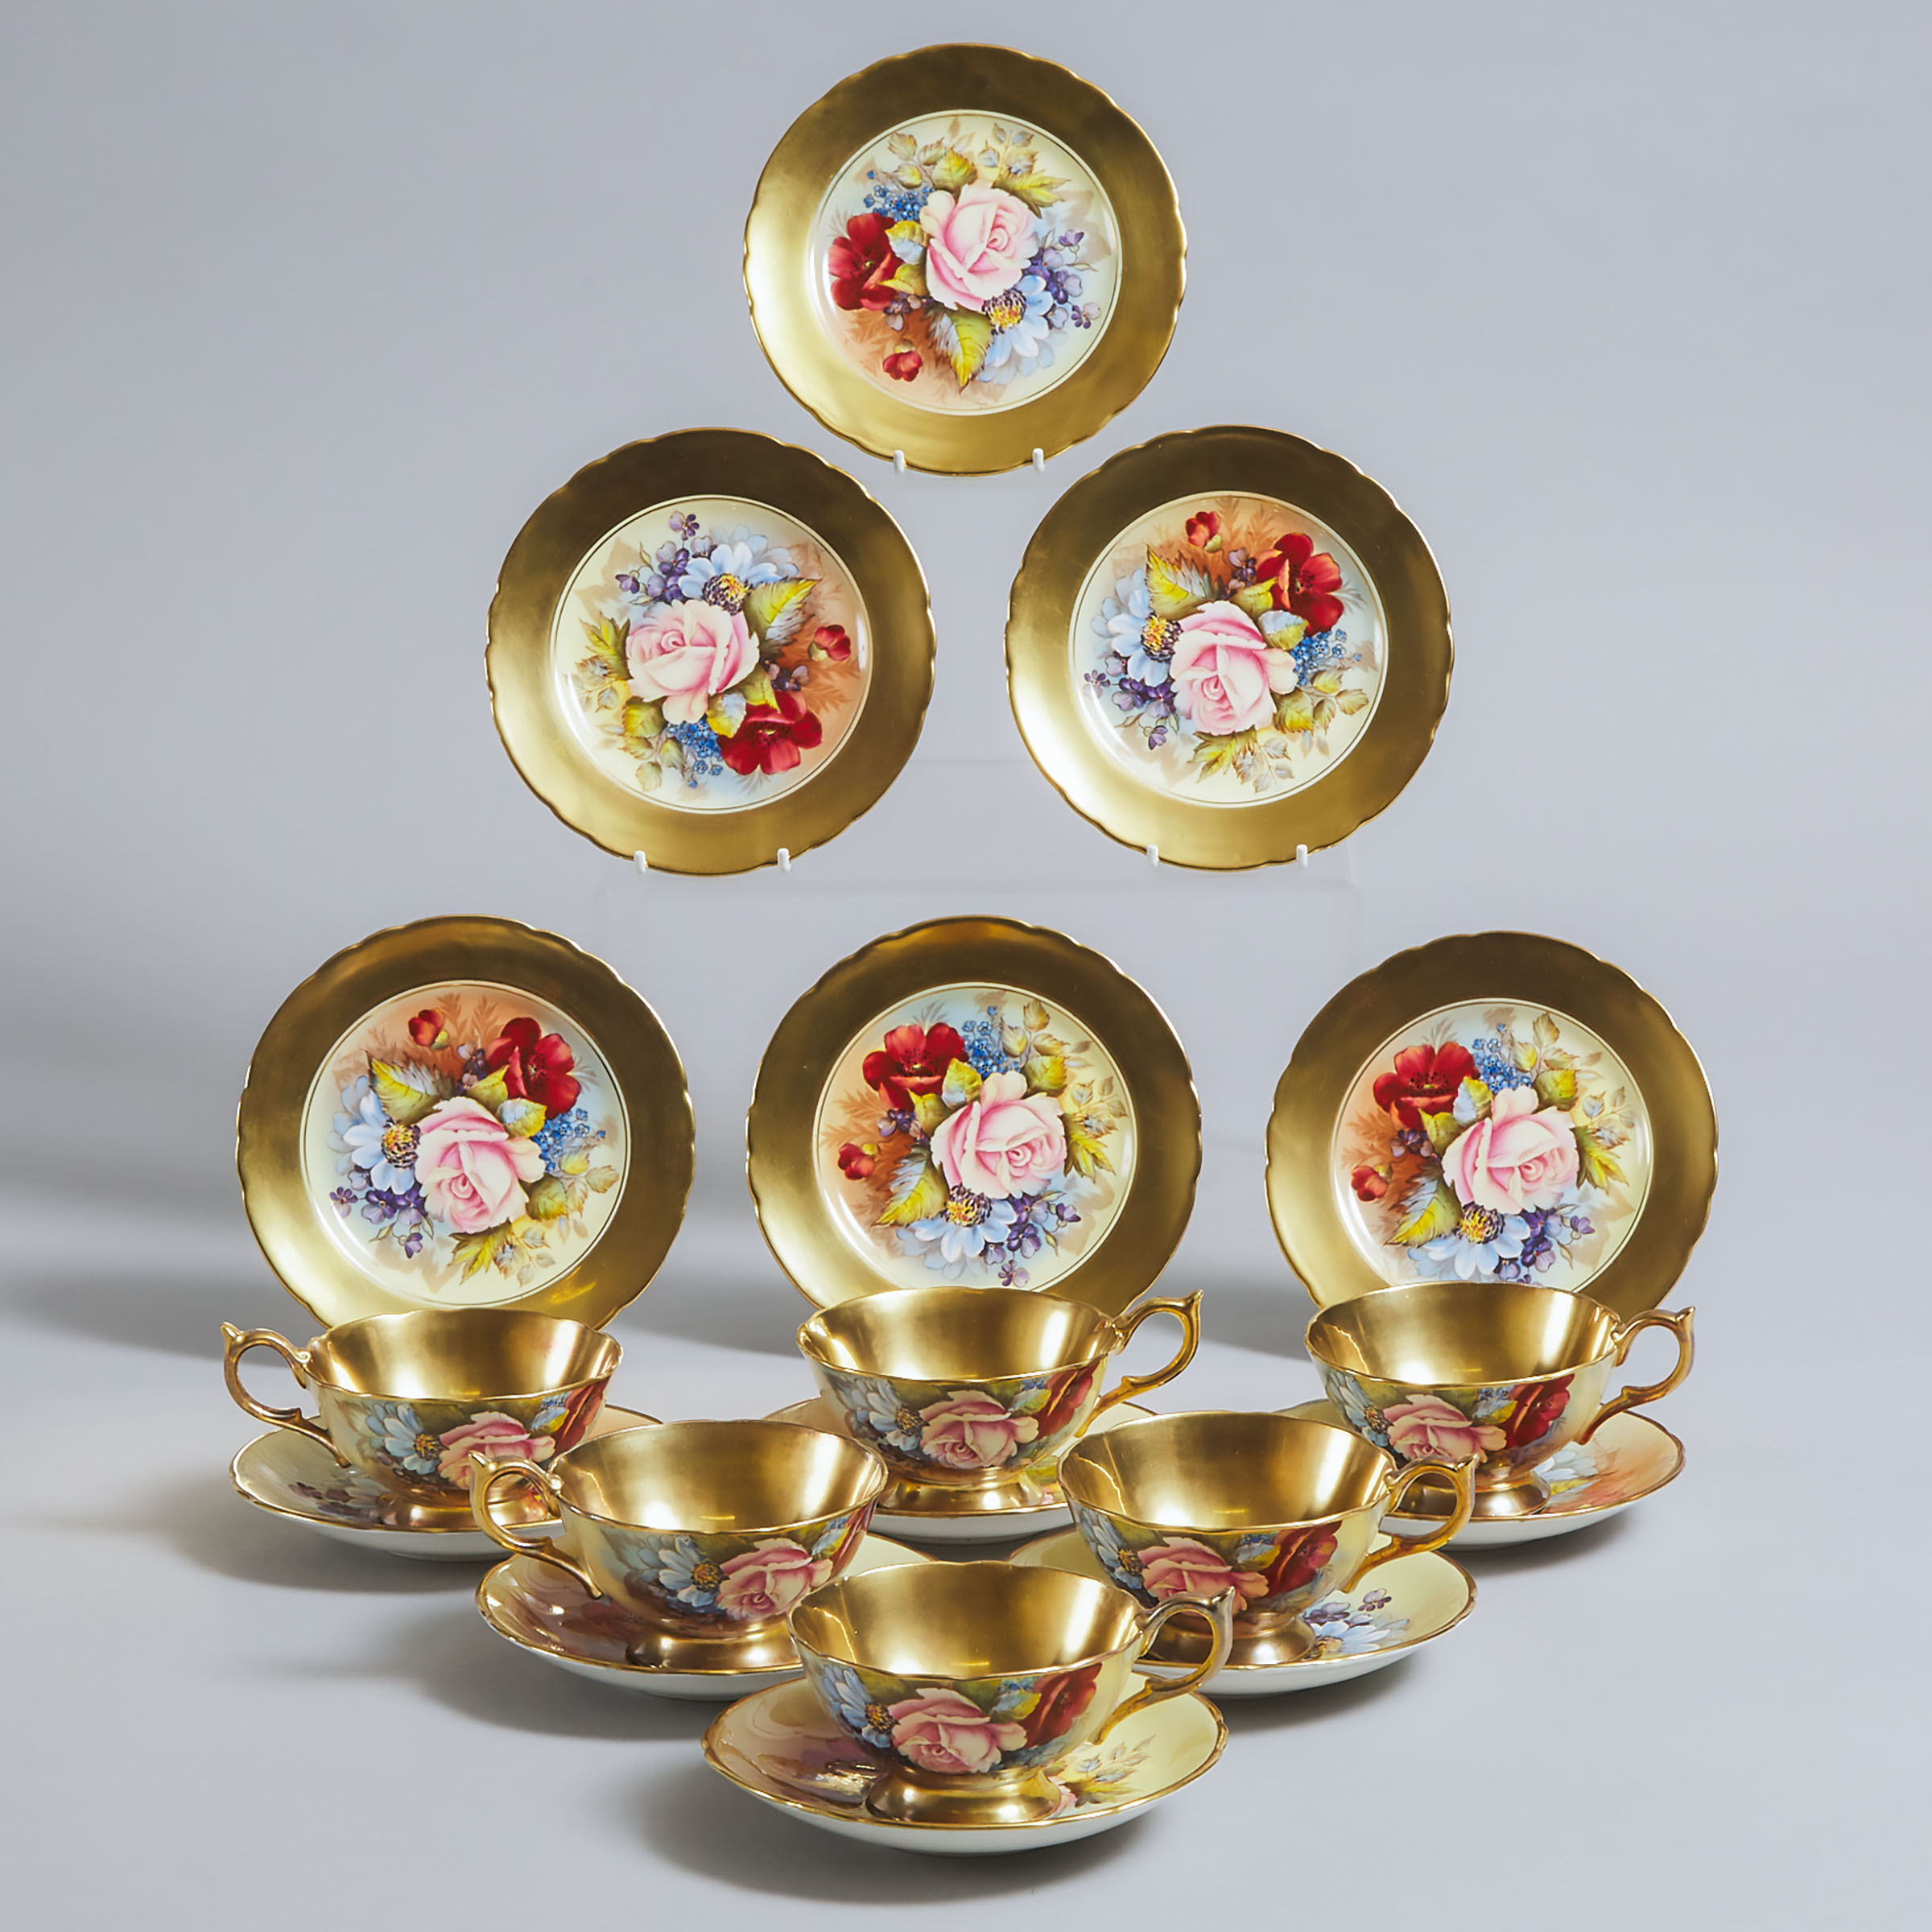 Six Aynsley 'Cabbage Rose' Tea Cups, Saucers and Plates, J.A. Bailey, 20th century